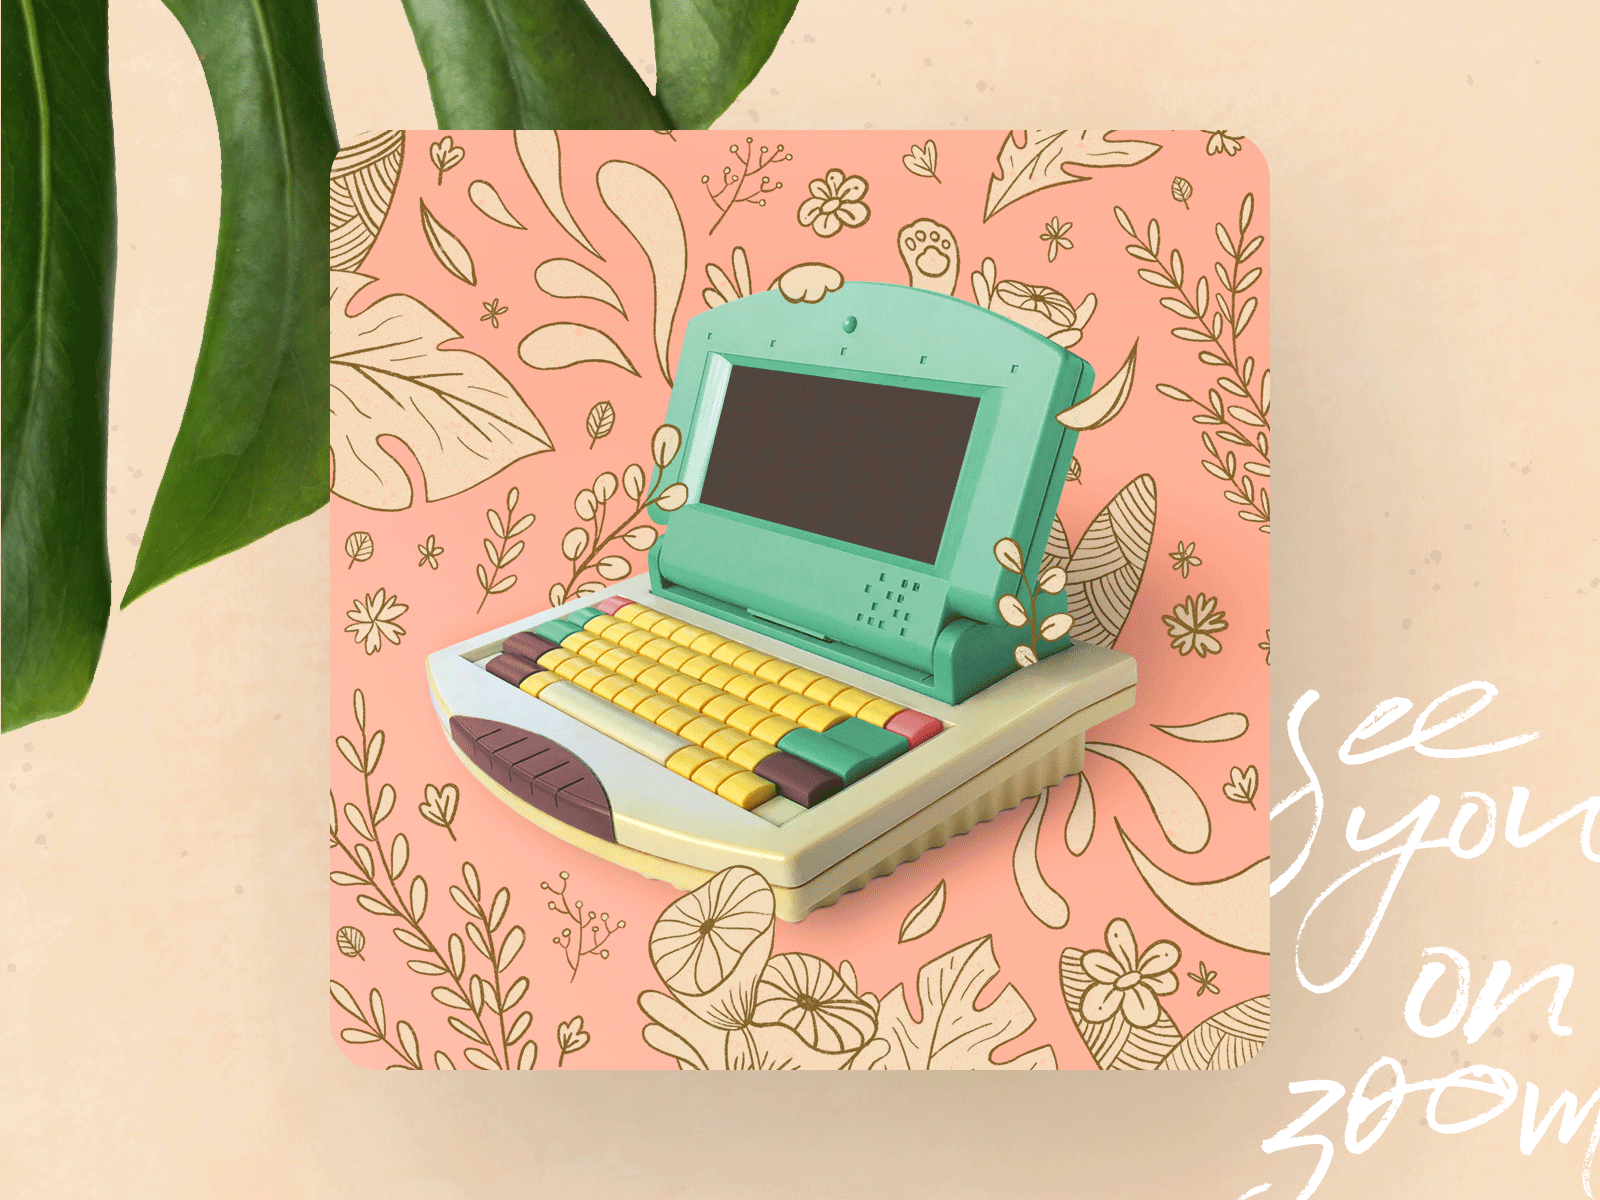 See You on Zoom 90s animation feminine floral illustration laptop old toys pastel quarantine life video call work from home zoom